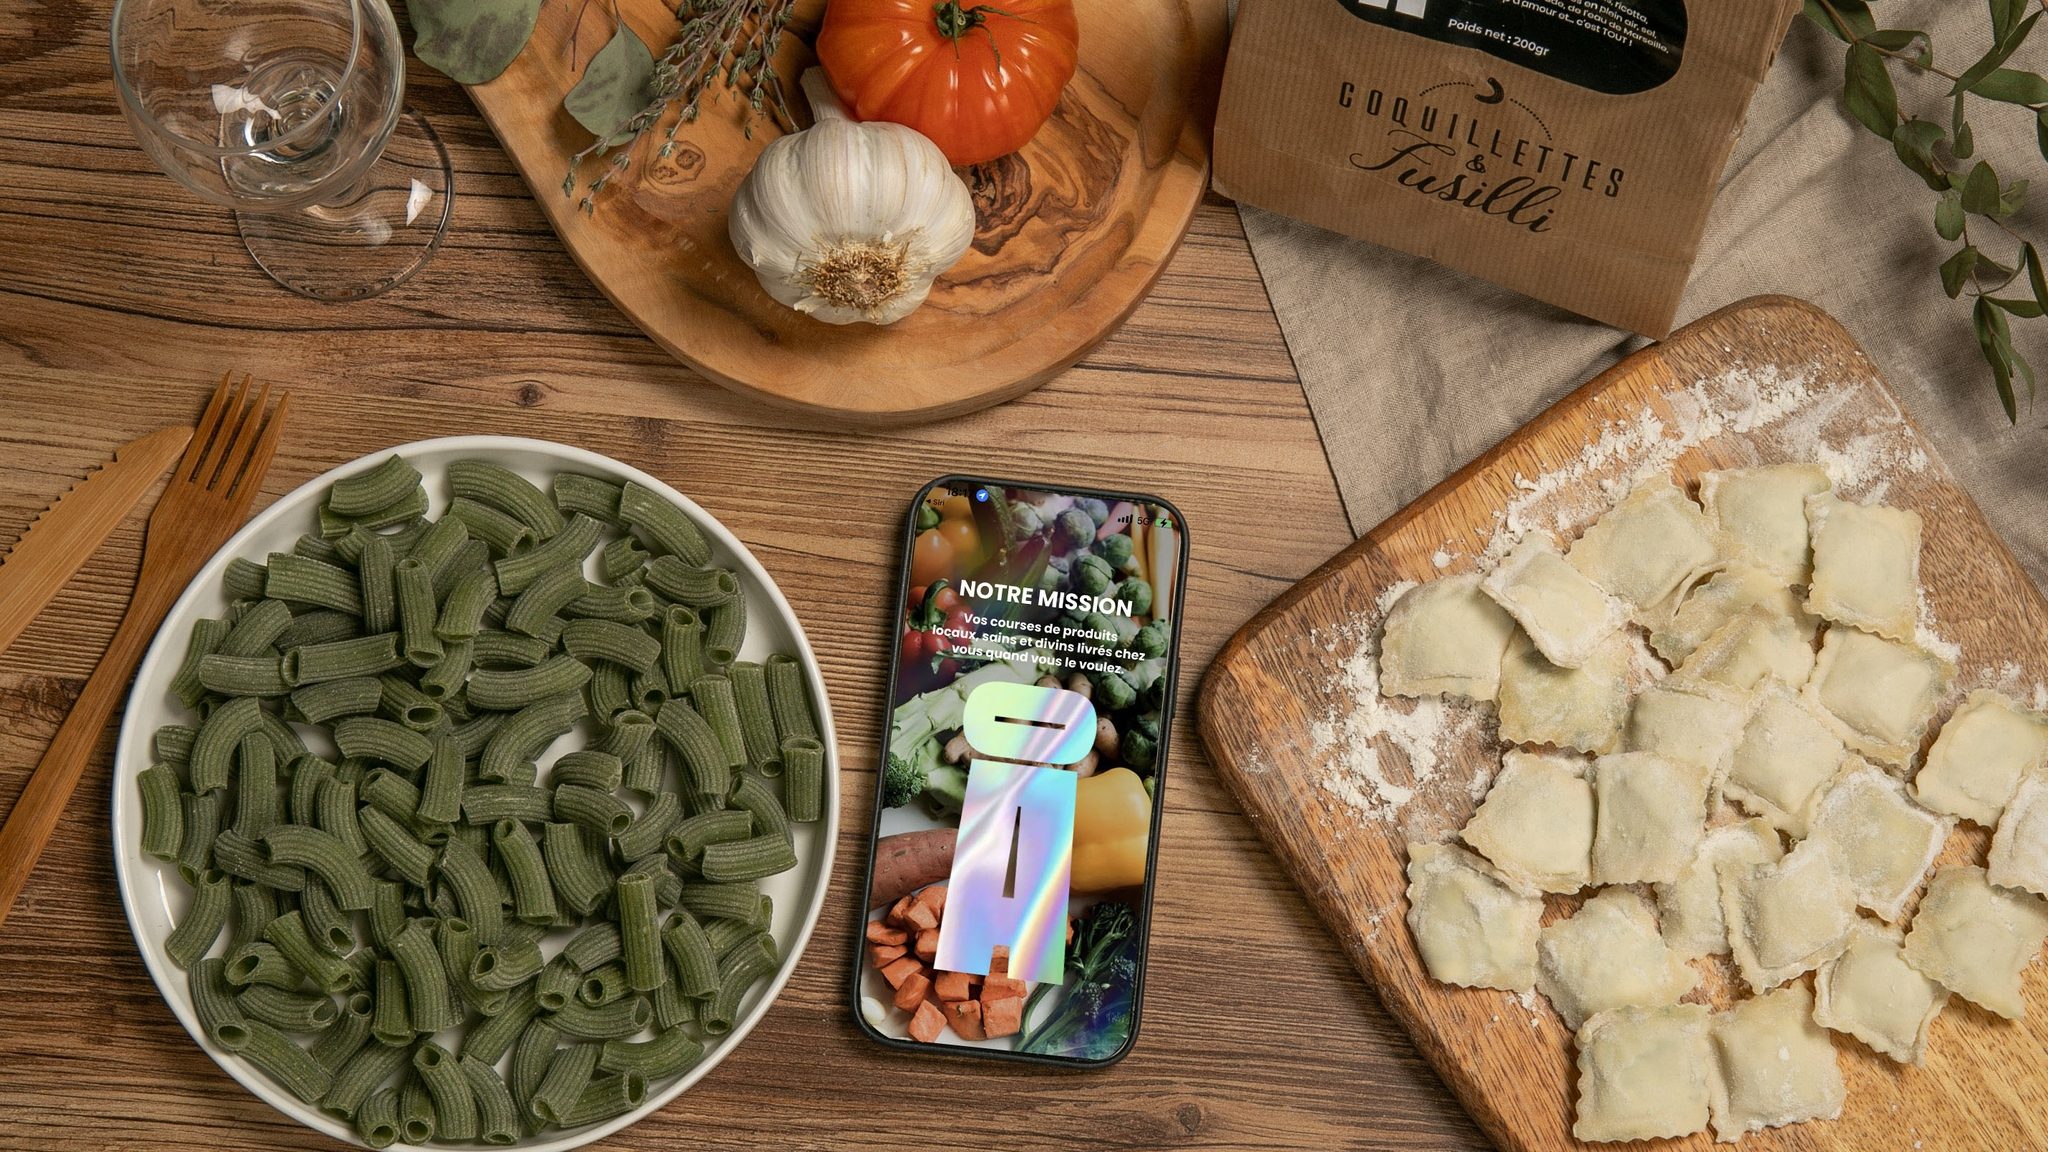 Santafoo allows you to consume local and healthy products